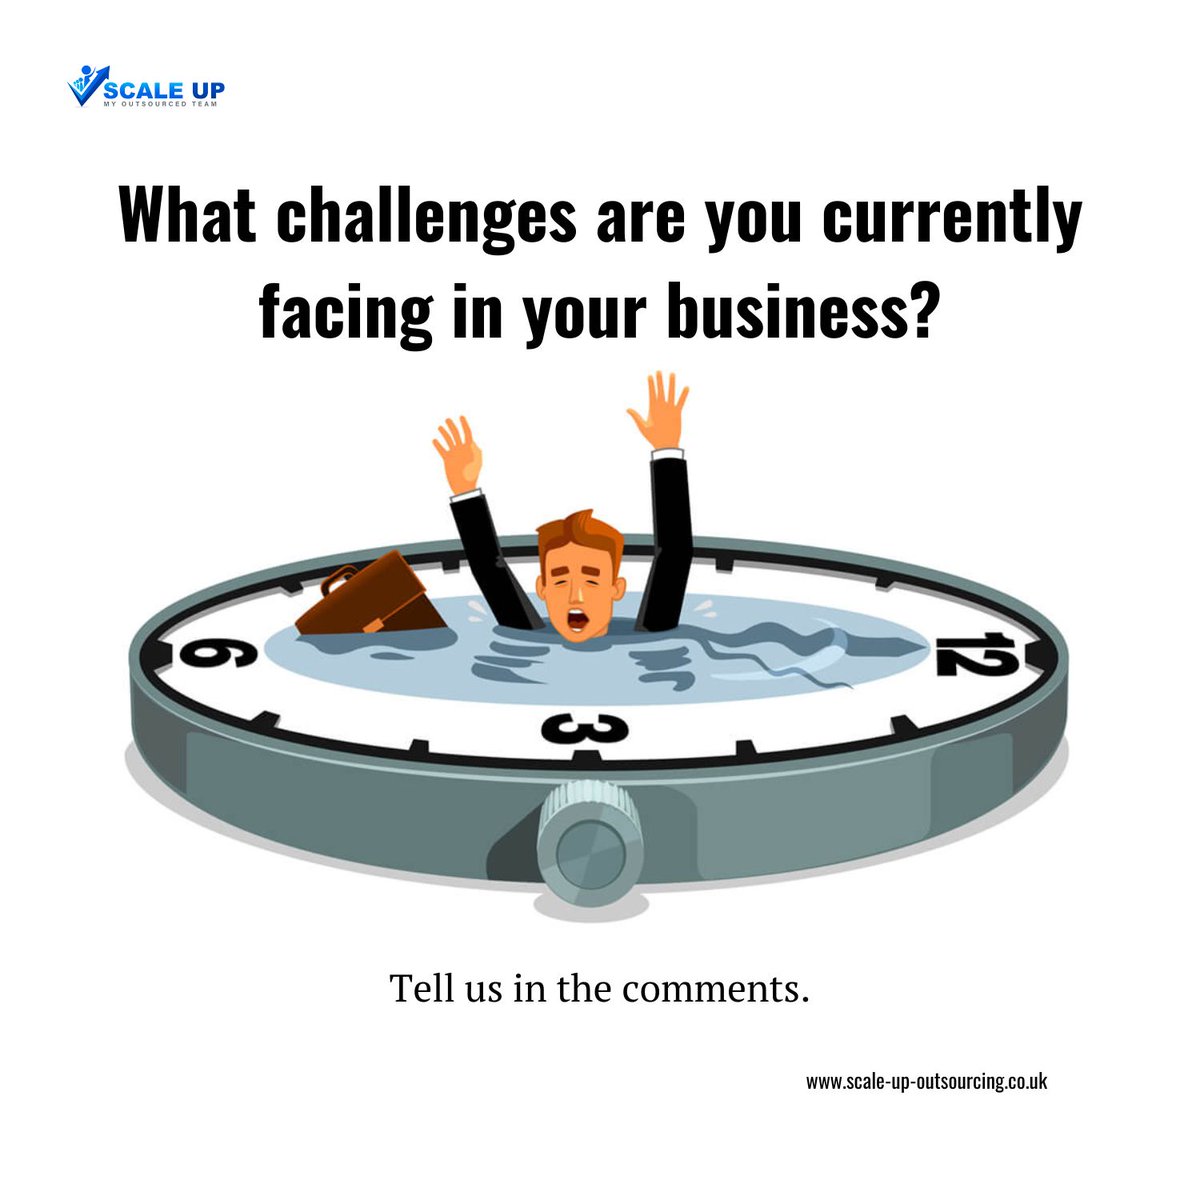 Business challenges ahead? 🚀

Share in the comments, and let's conquer them together! 

#BusinessChallenges #ProblemSolving #Entrepreneurship #OvercomeObstacles #BusinessGrowth #Collaboration #SeekingSolutions #TeamWork #BusinessStrategies #TogetherWeCan